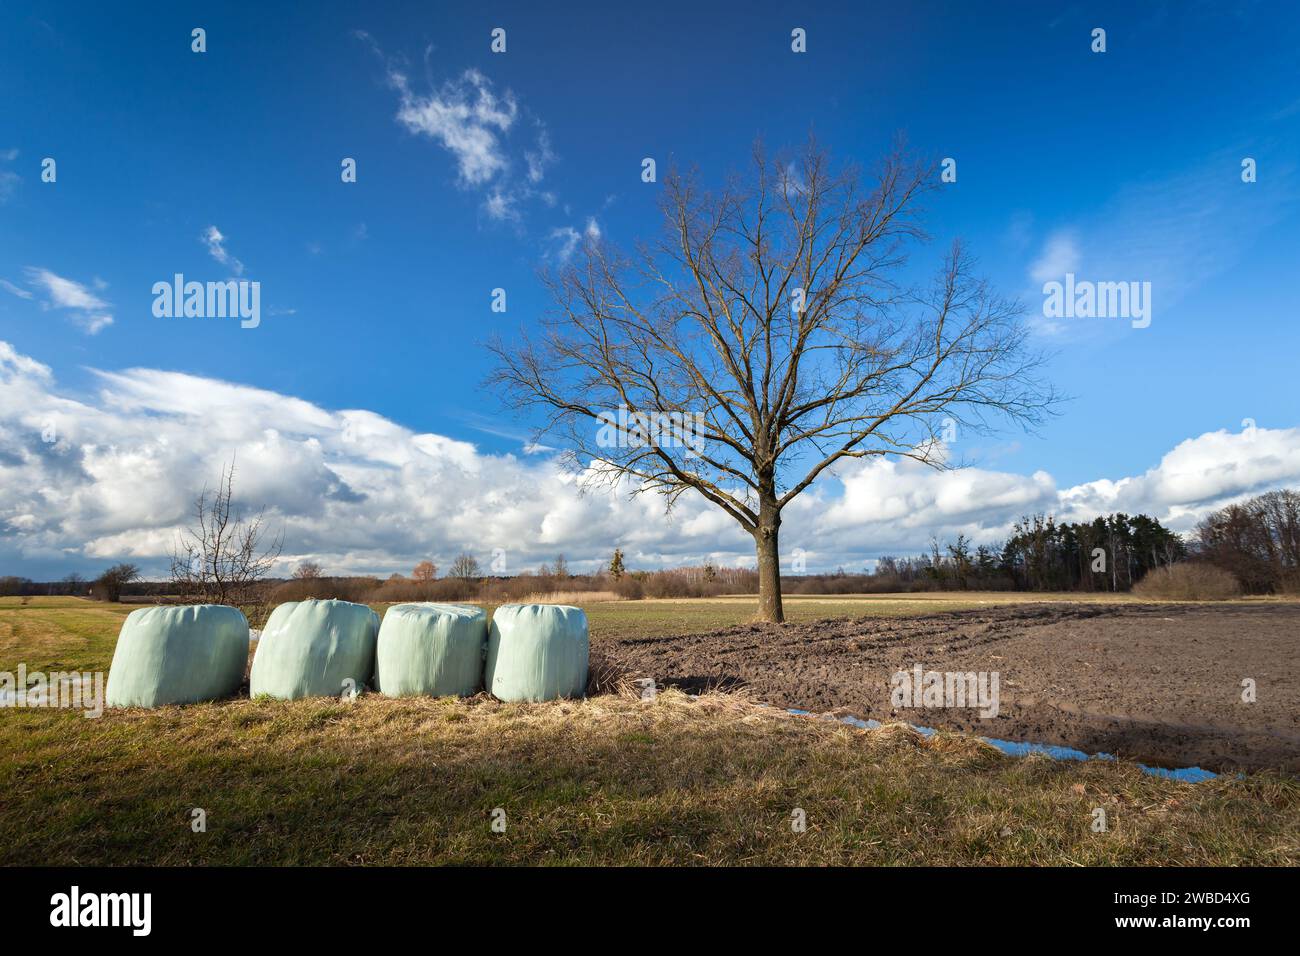 Bales of silage lying in a meadow and an oak tree without leaves growing next to a plowed field, Nowiny in eastern Poland Stock Photo